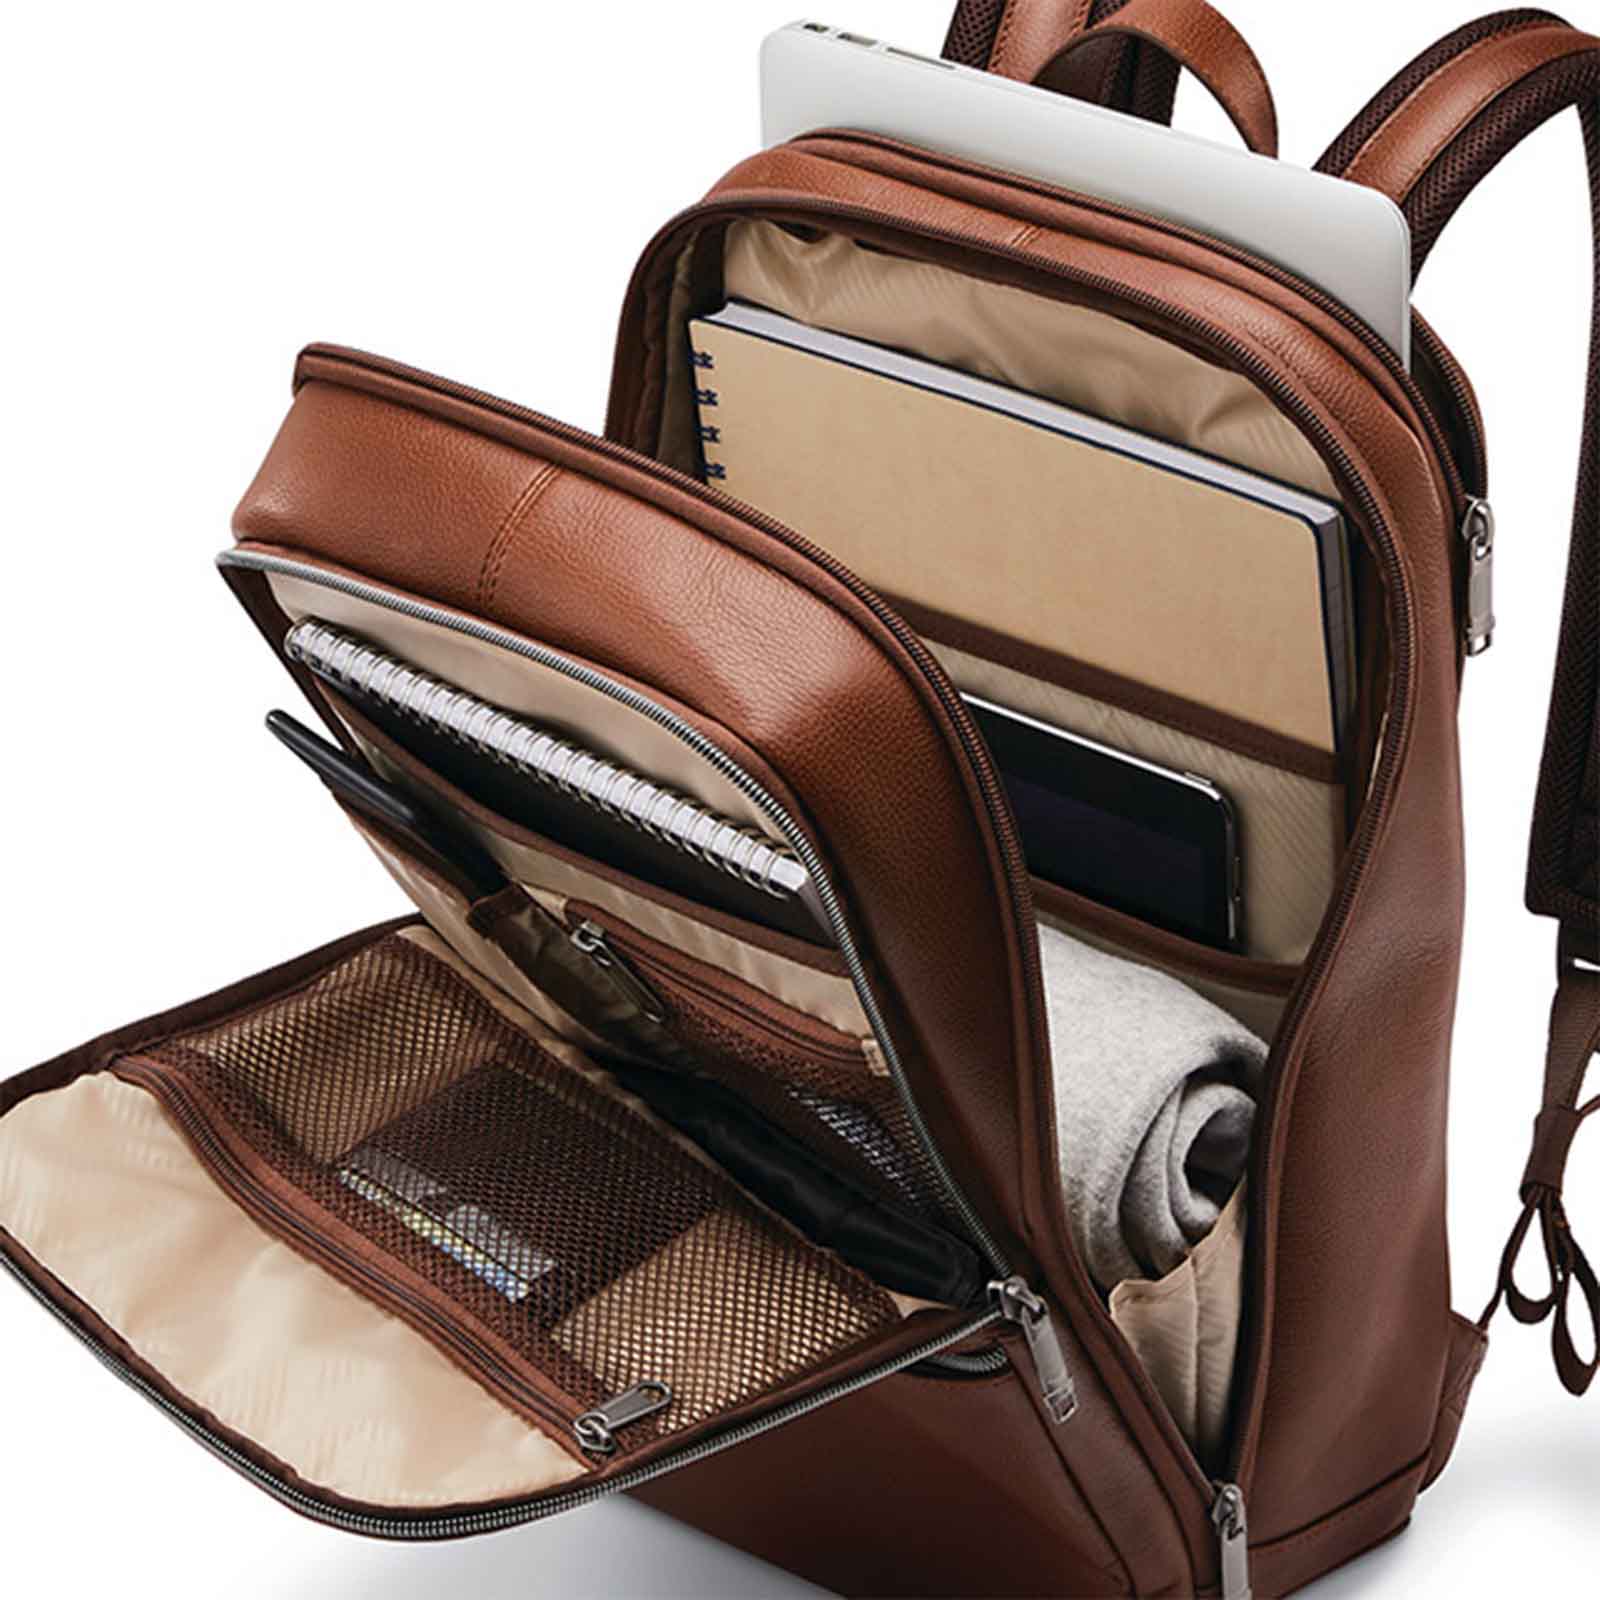 Samsonite-Classic-Leather-14-Inch-Laptop-Backpack-Cognac-Open